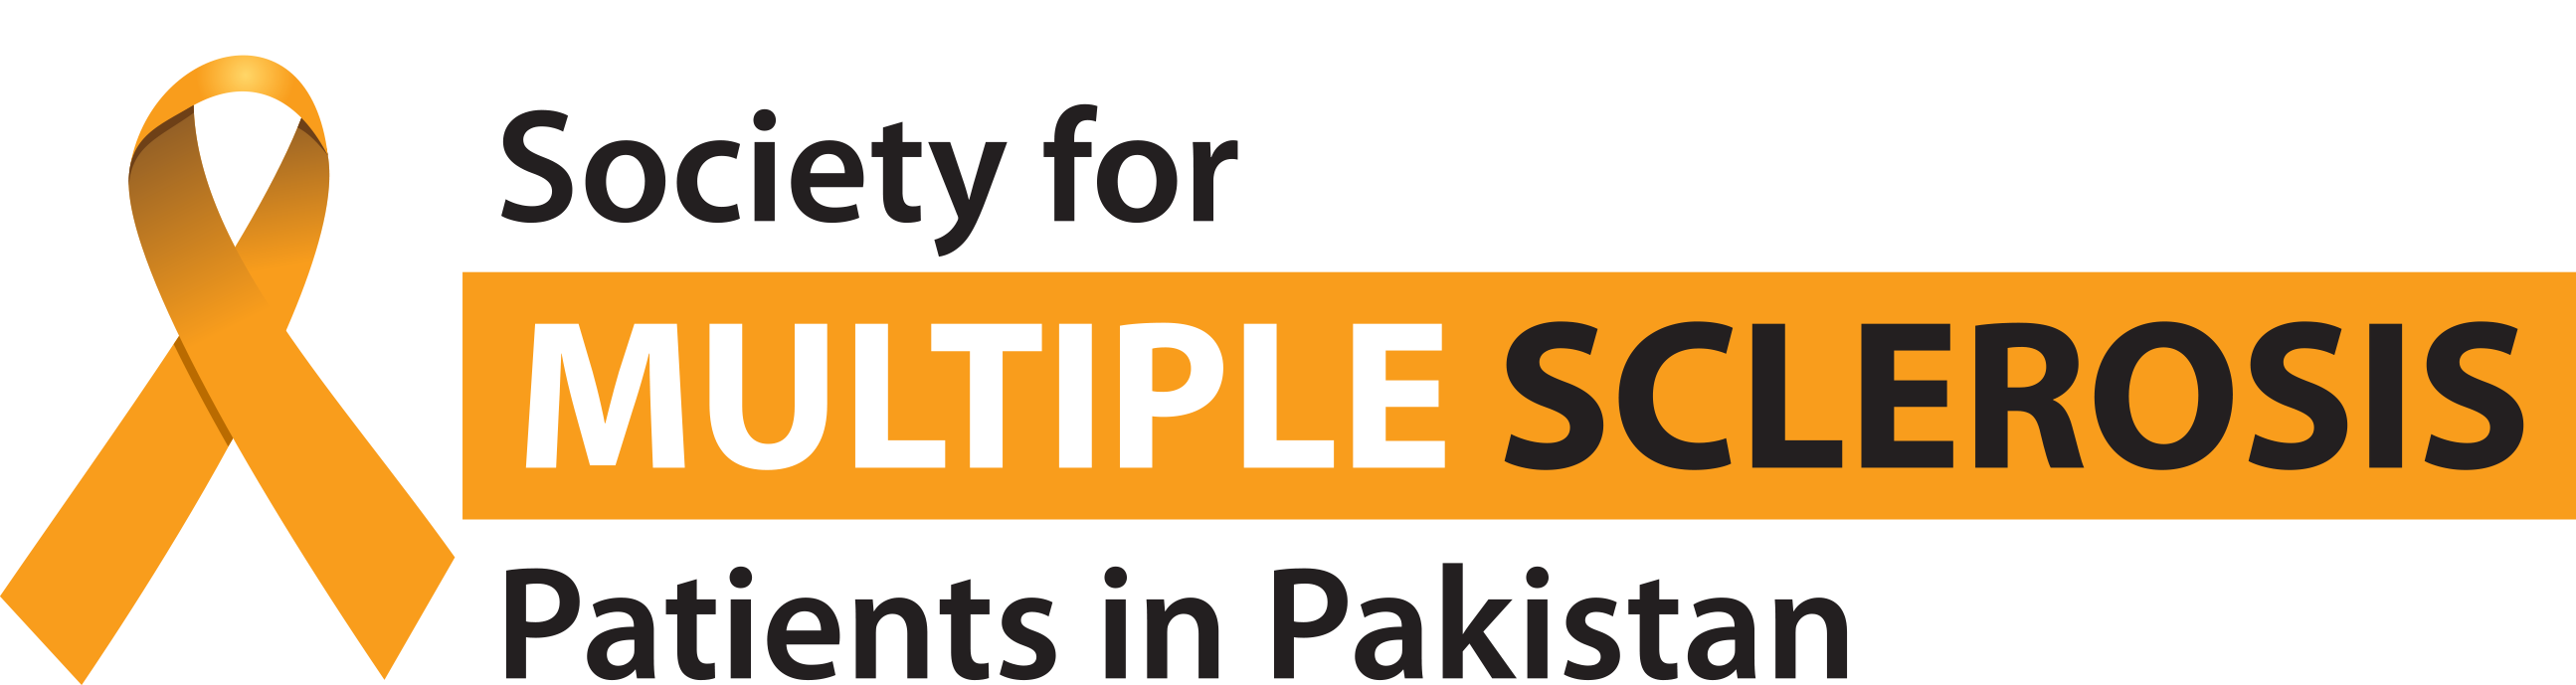 Society for Multiple Sclerosis Patients in Pakistan